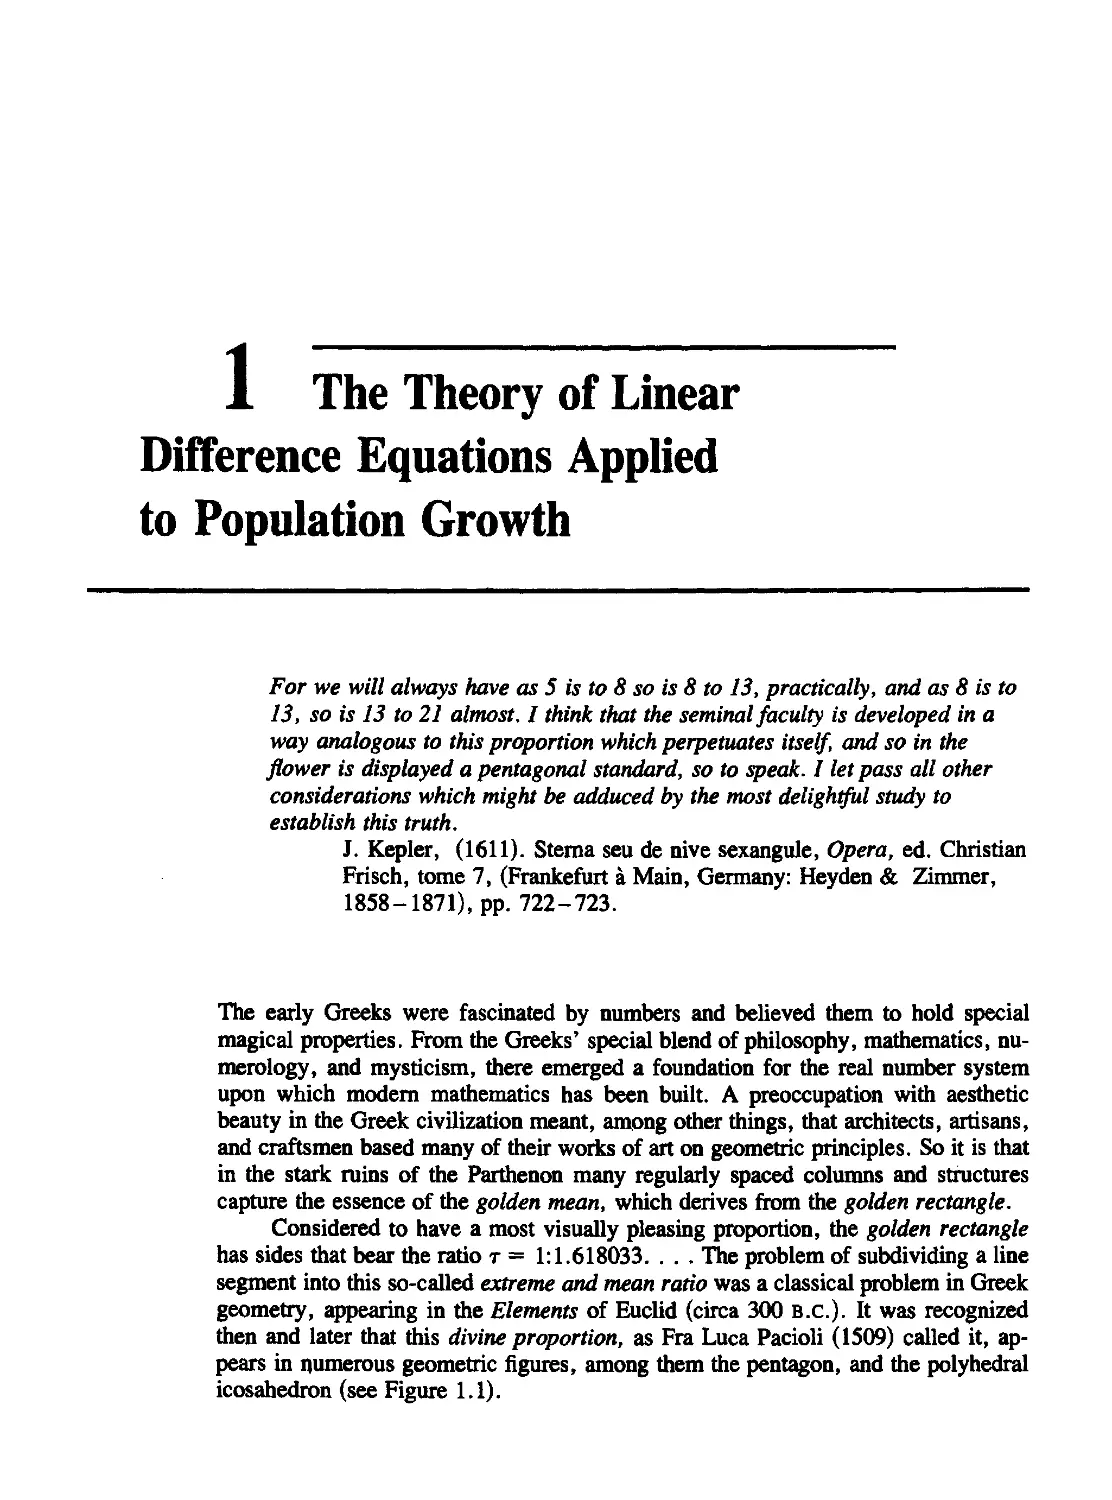 Chapter 1 The Theory of Linear Difference Equations Applied to Population Growth